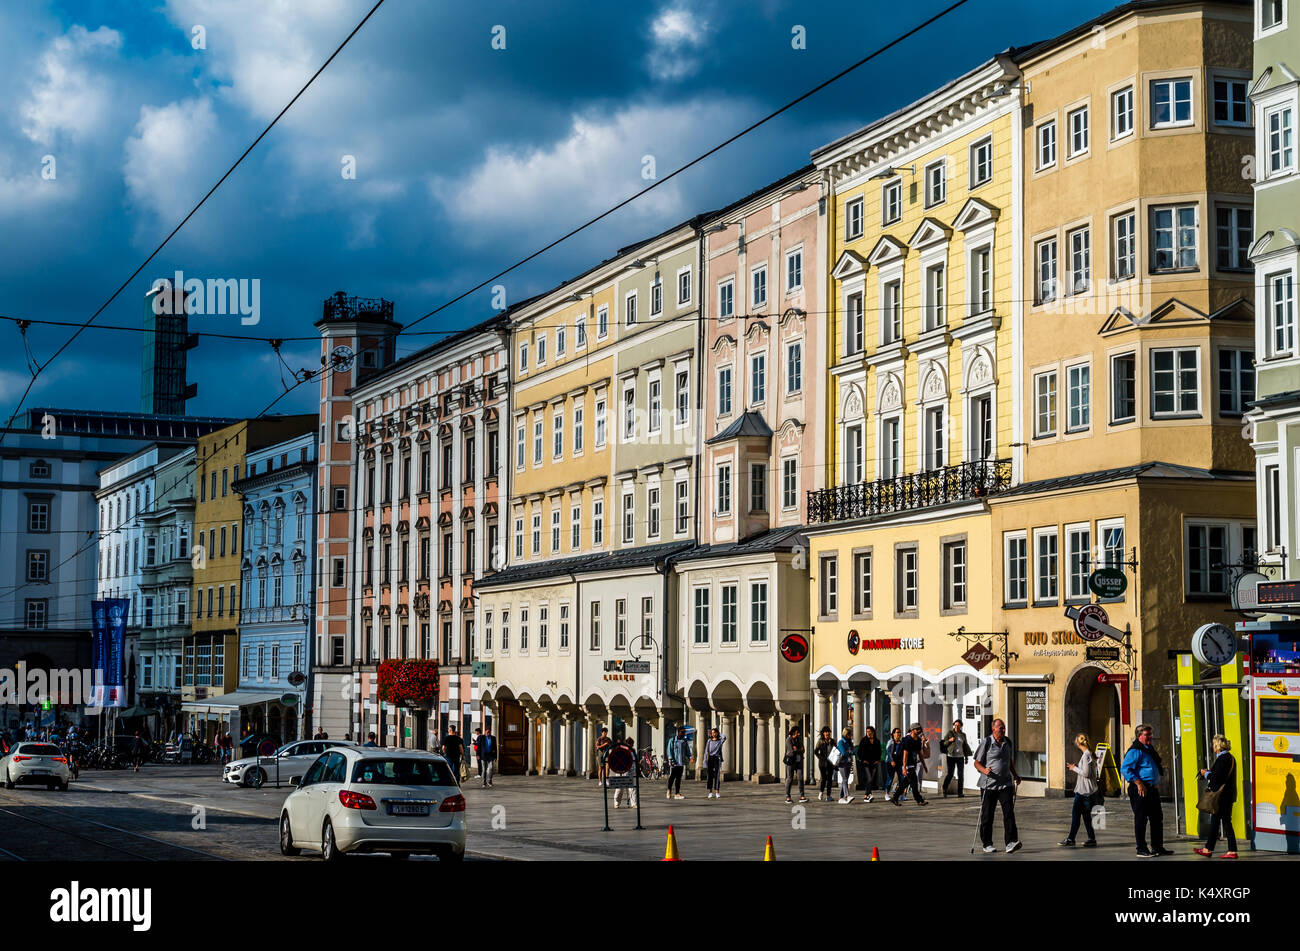 Place of interest linz, austria, with contrast in the colorful building exterior or architectural facade, home to people captured in their daily life Stock Photo